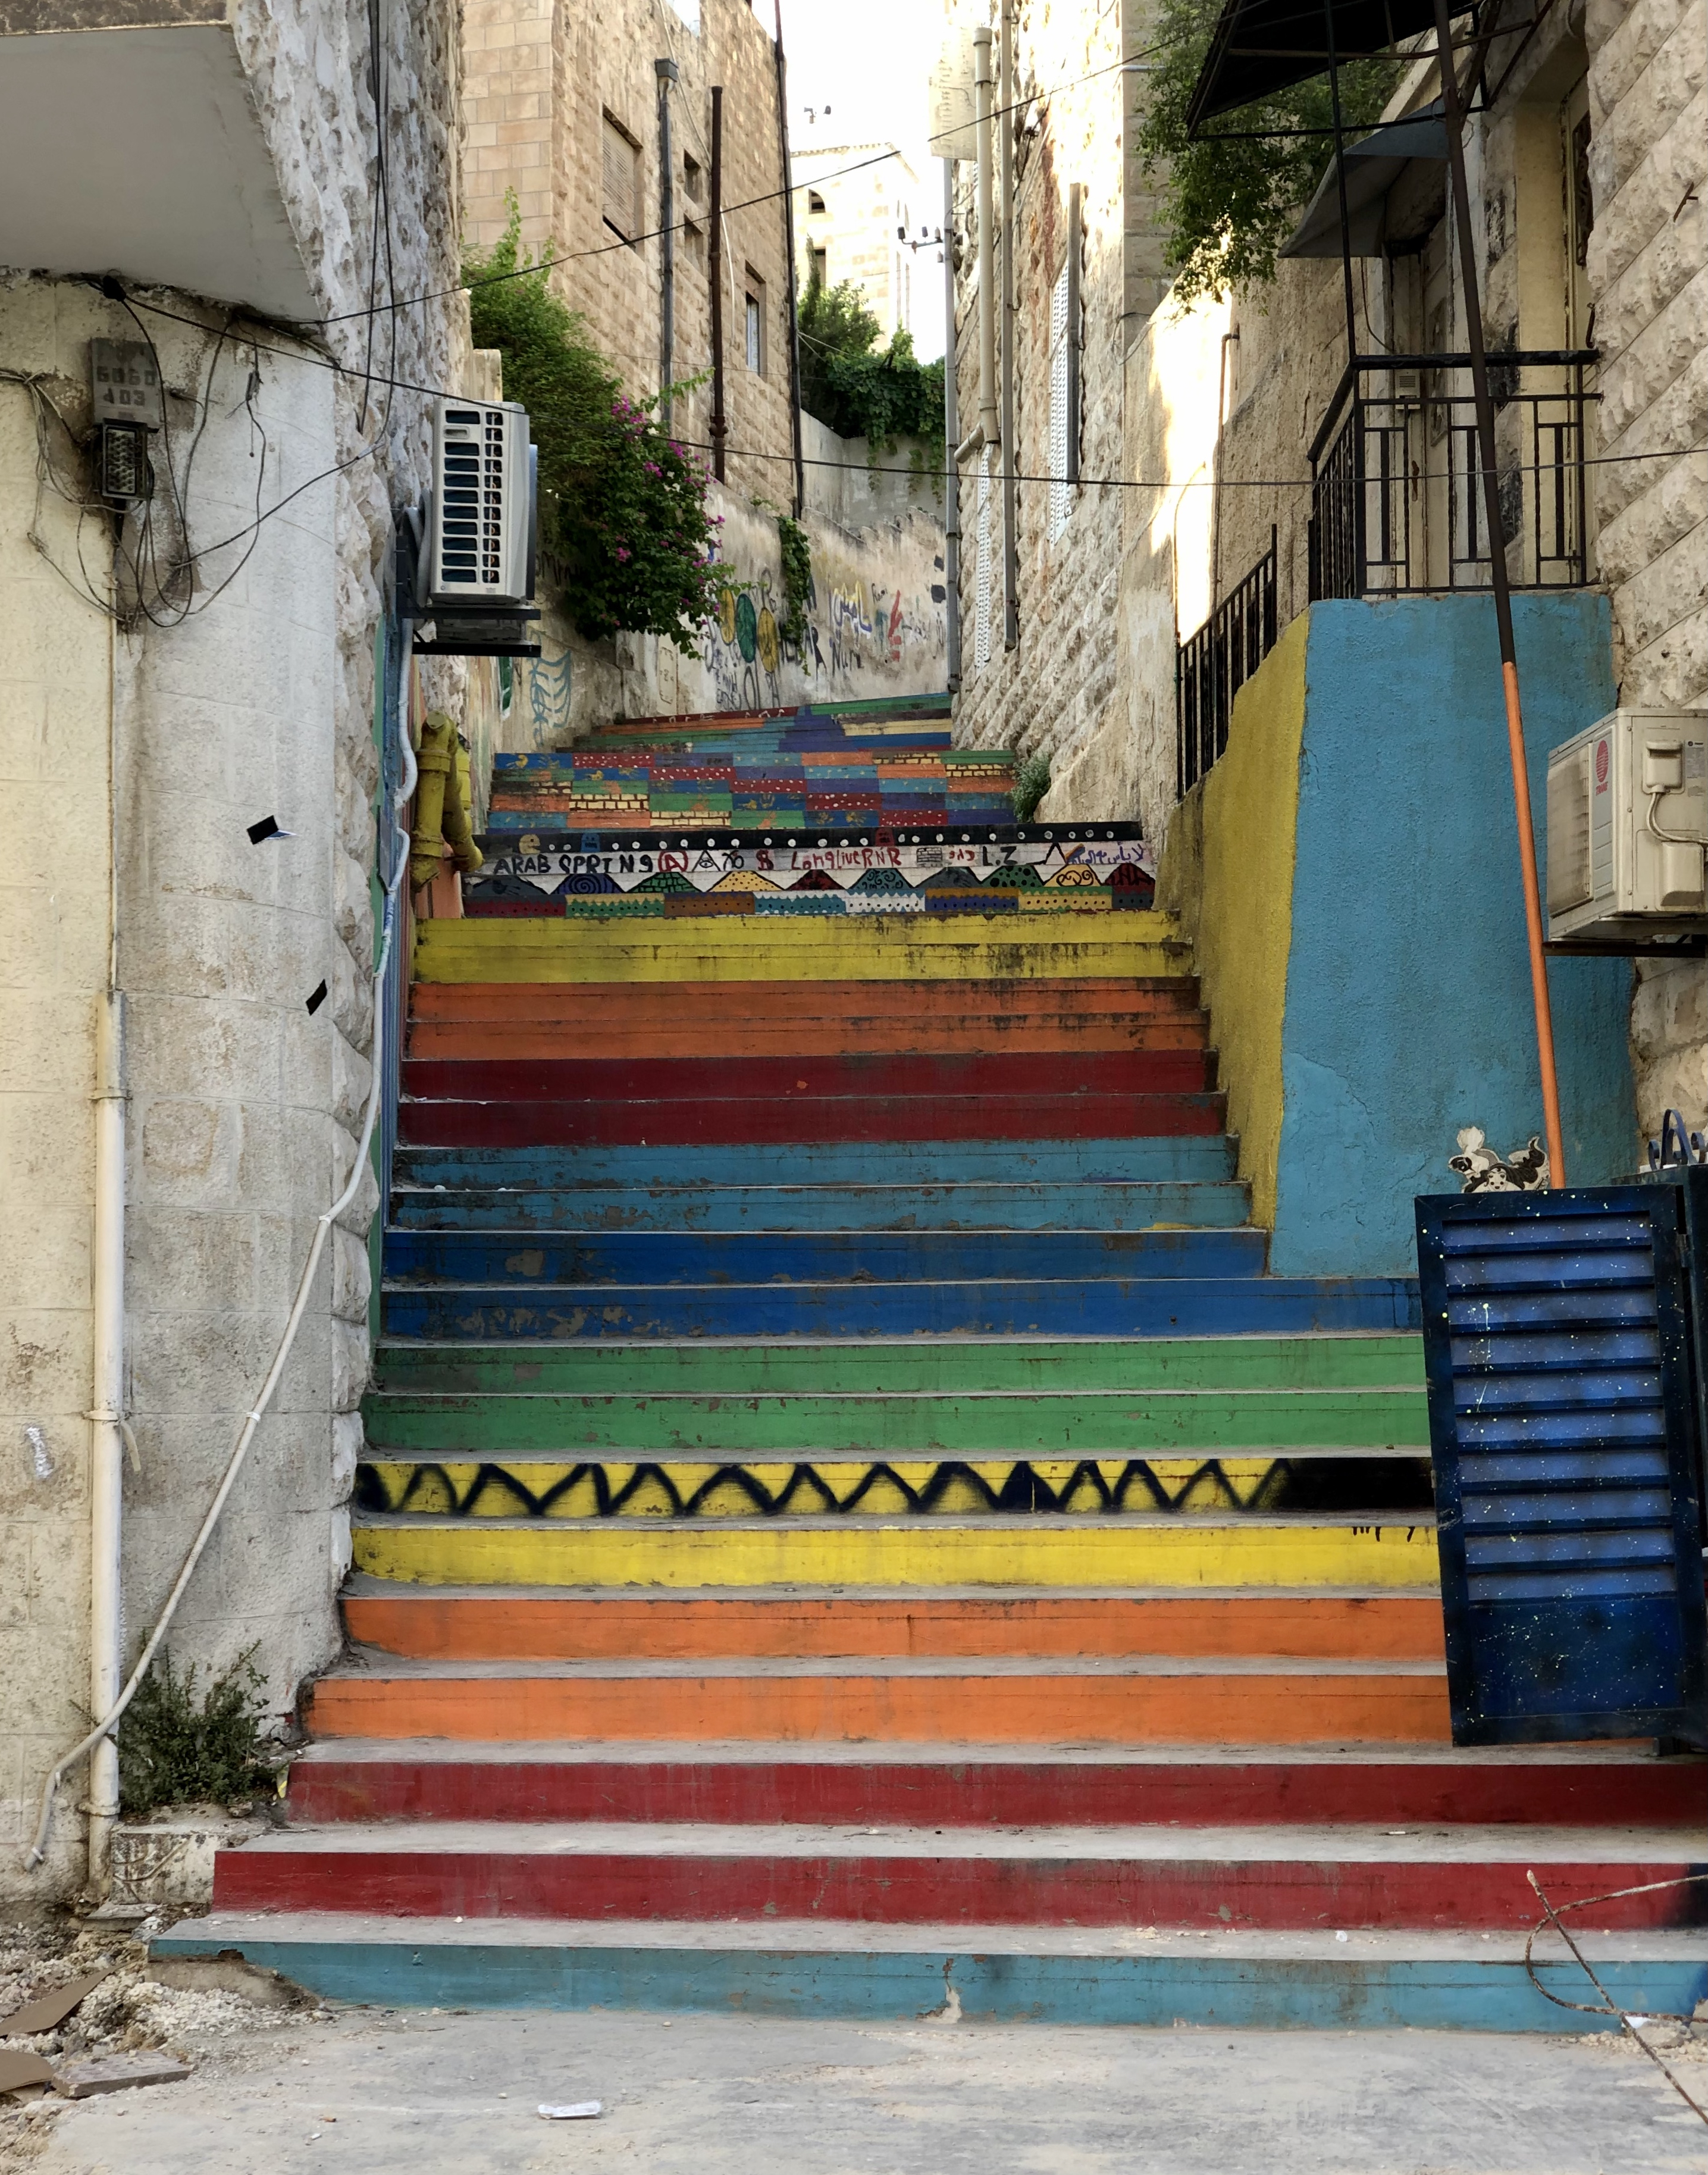 Rainbow-painted stairs connect downtown Amman to Rainbow Street